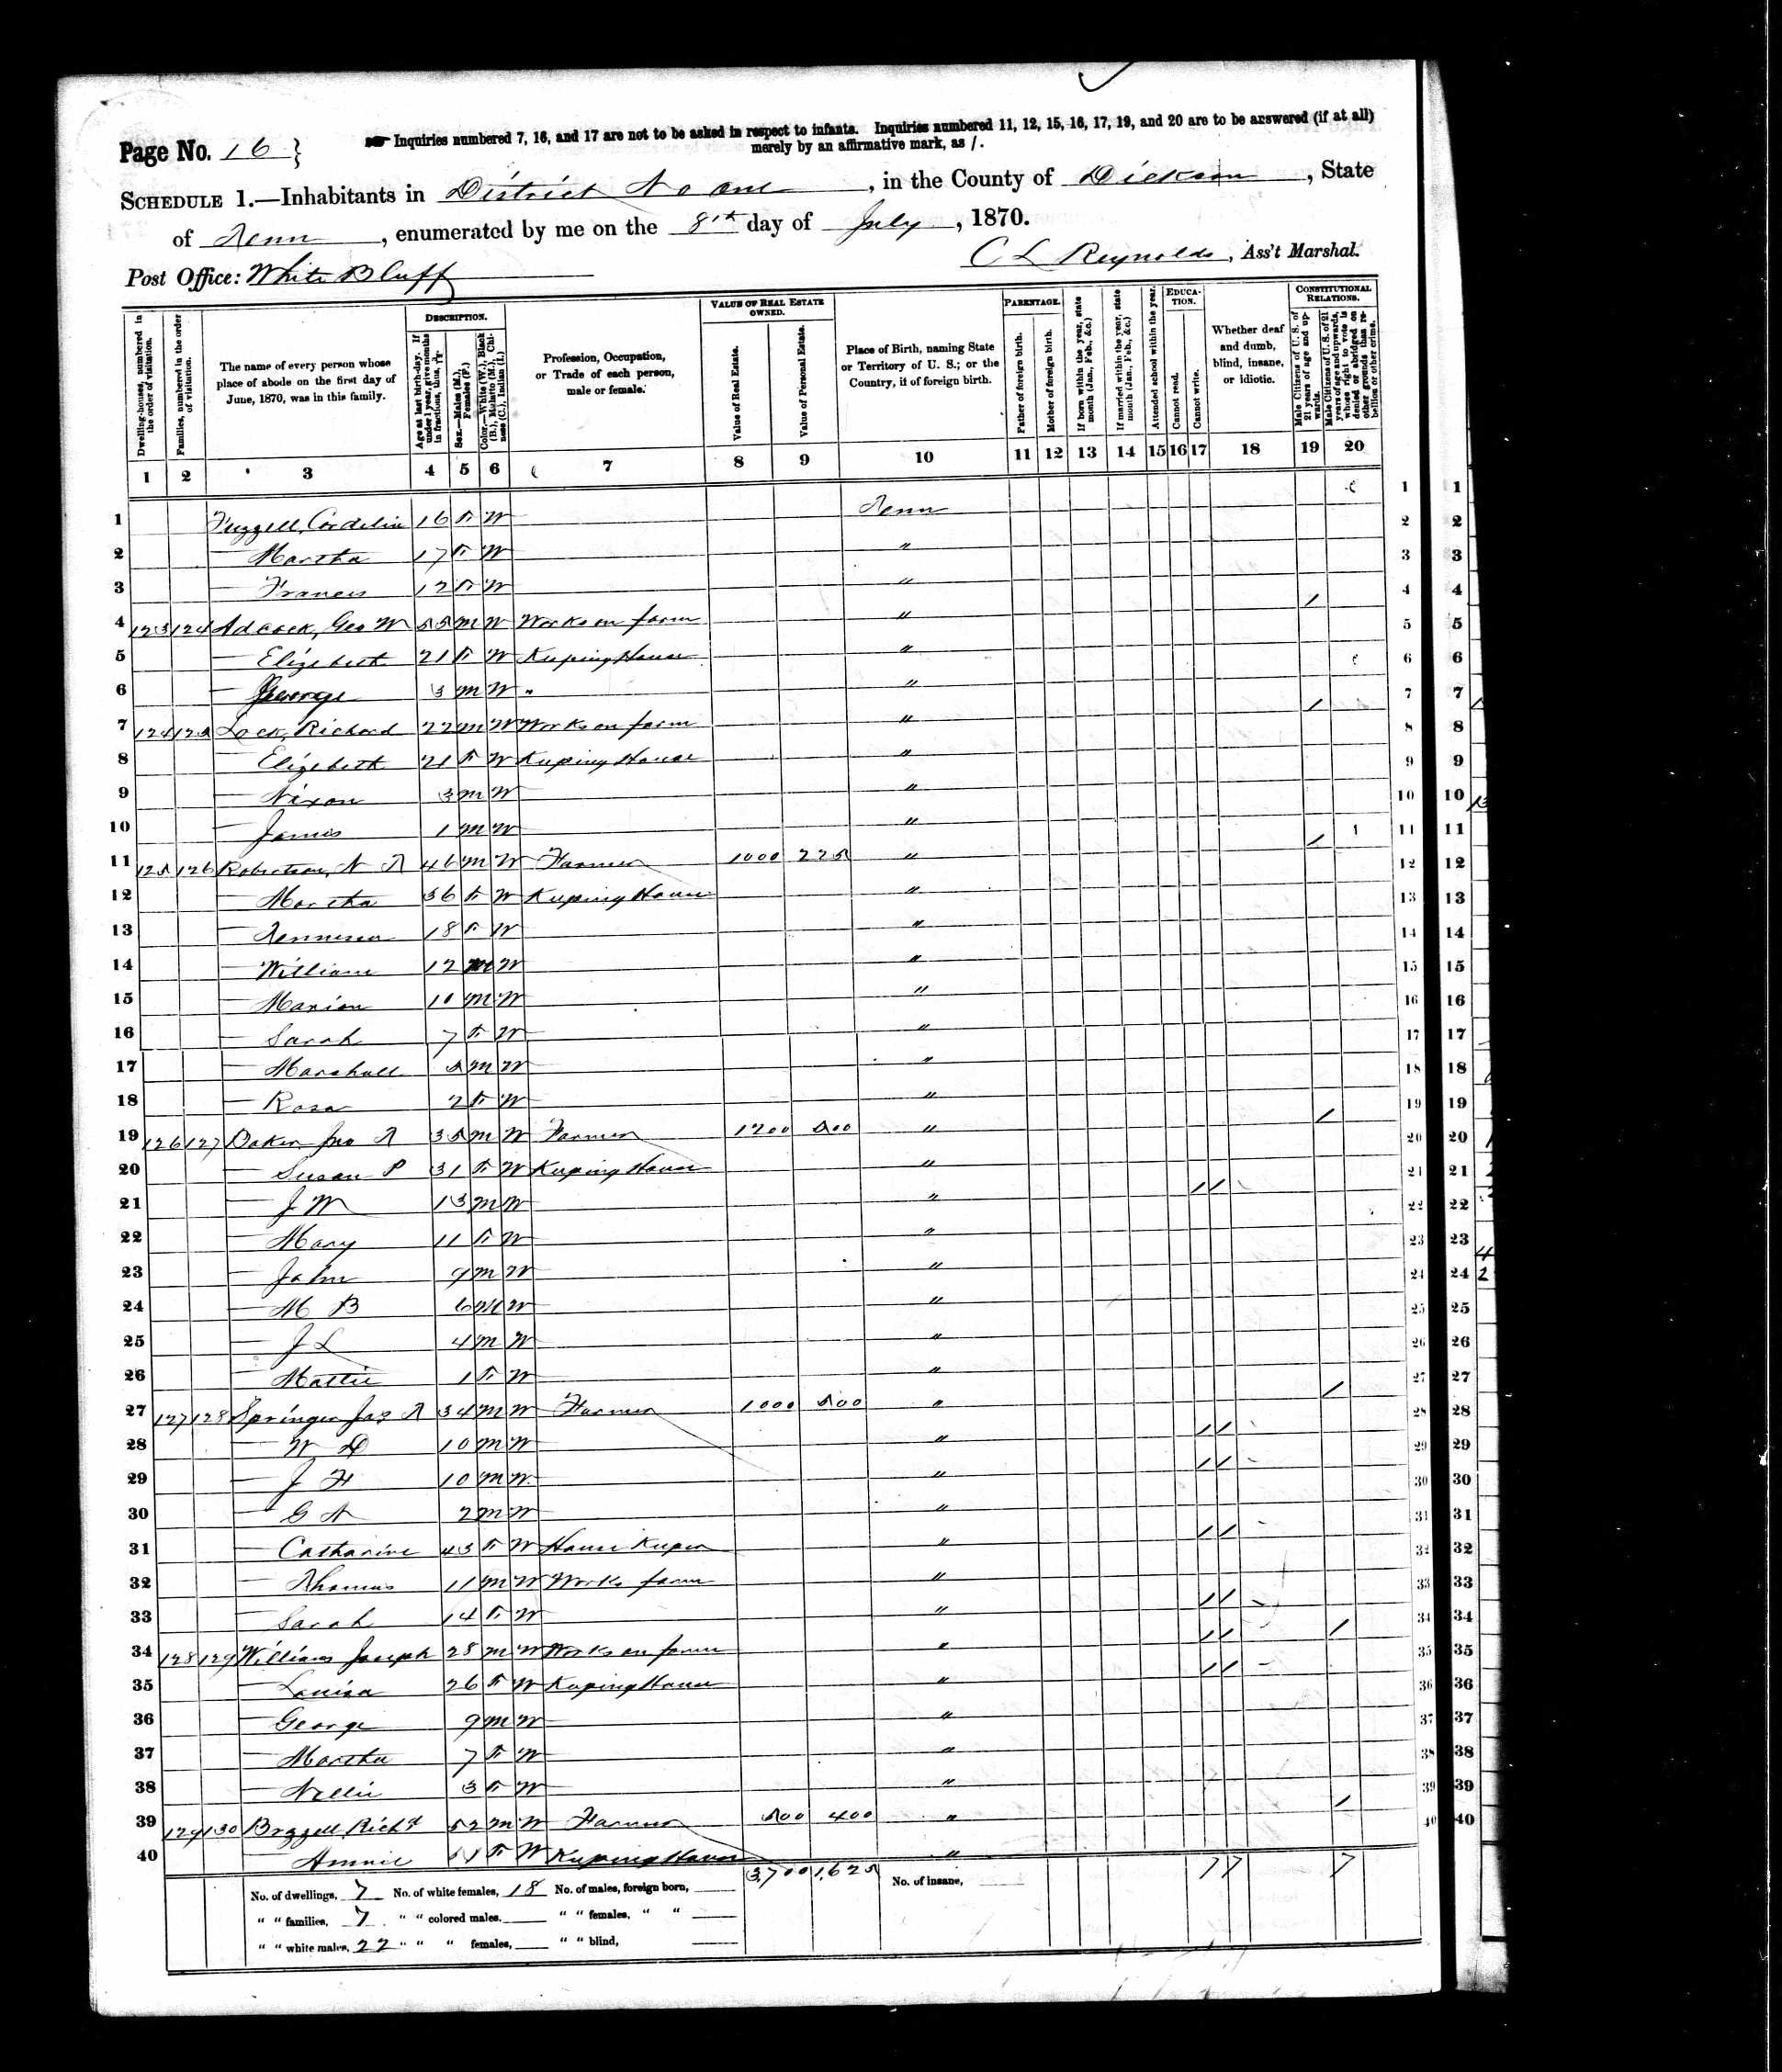 Richmond Brazzell, 1870 Dickson County, Tennessee, census